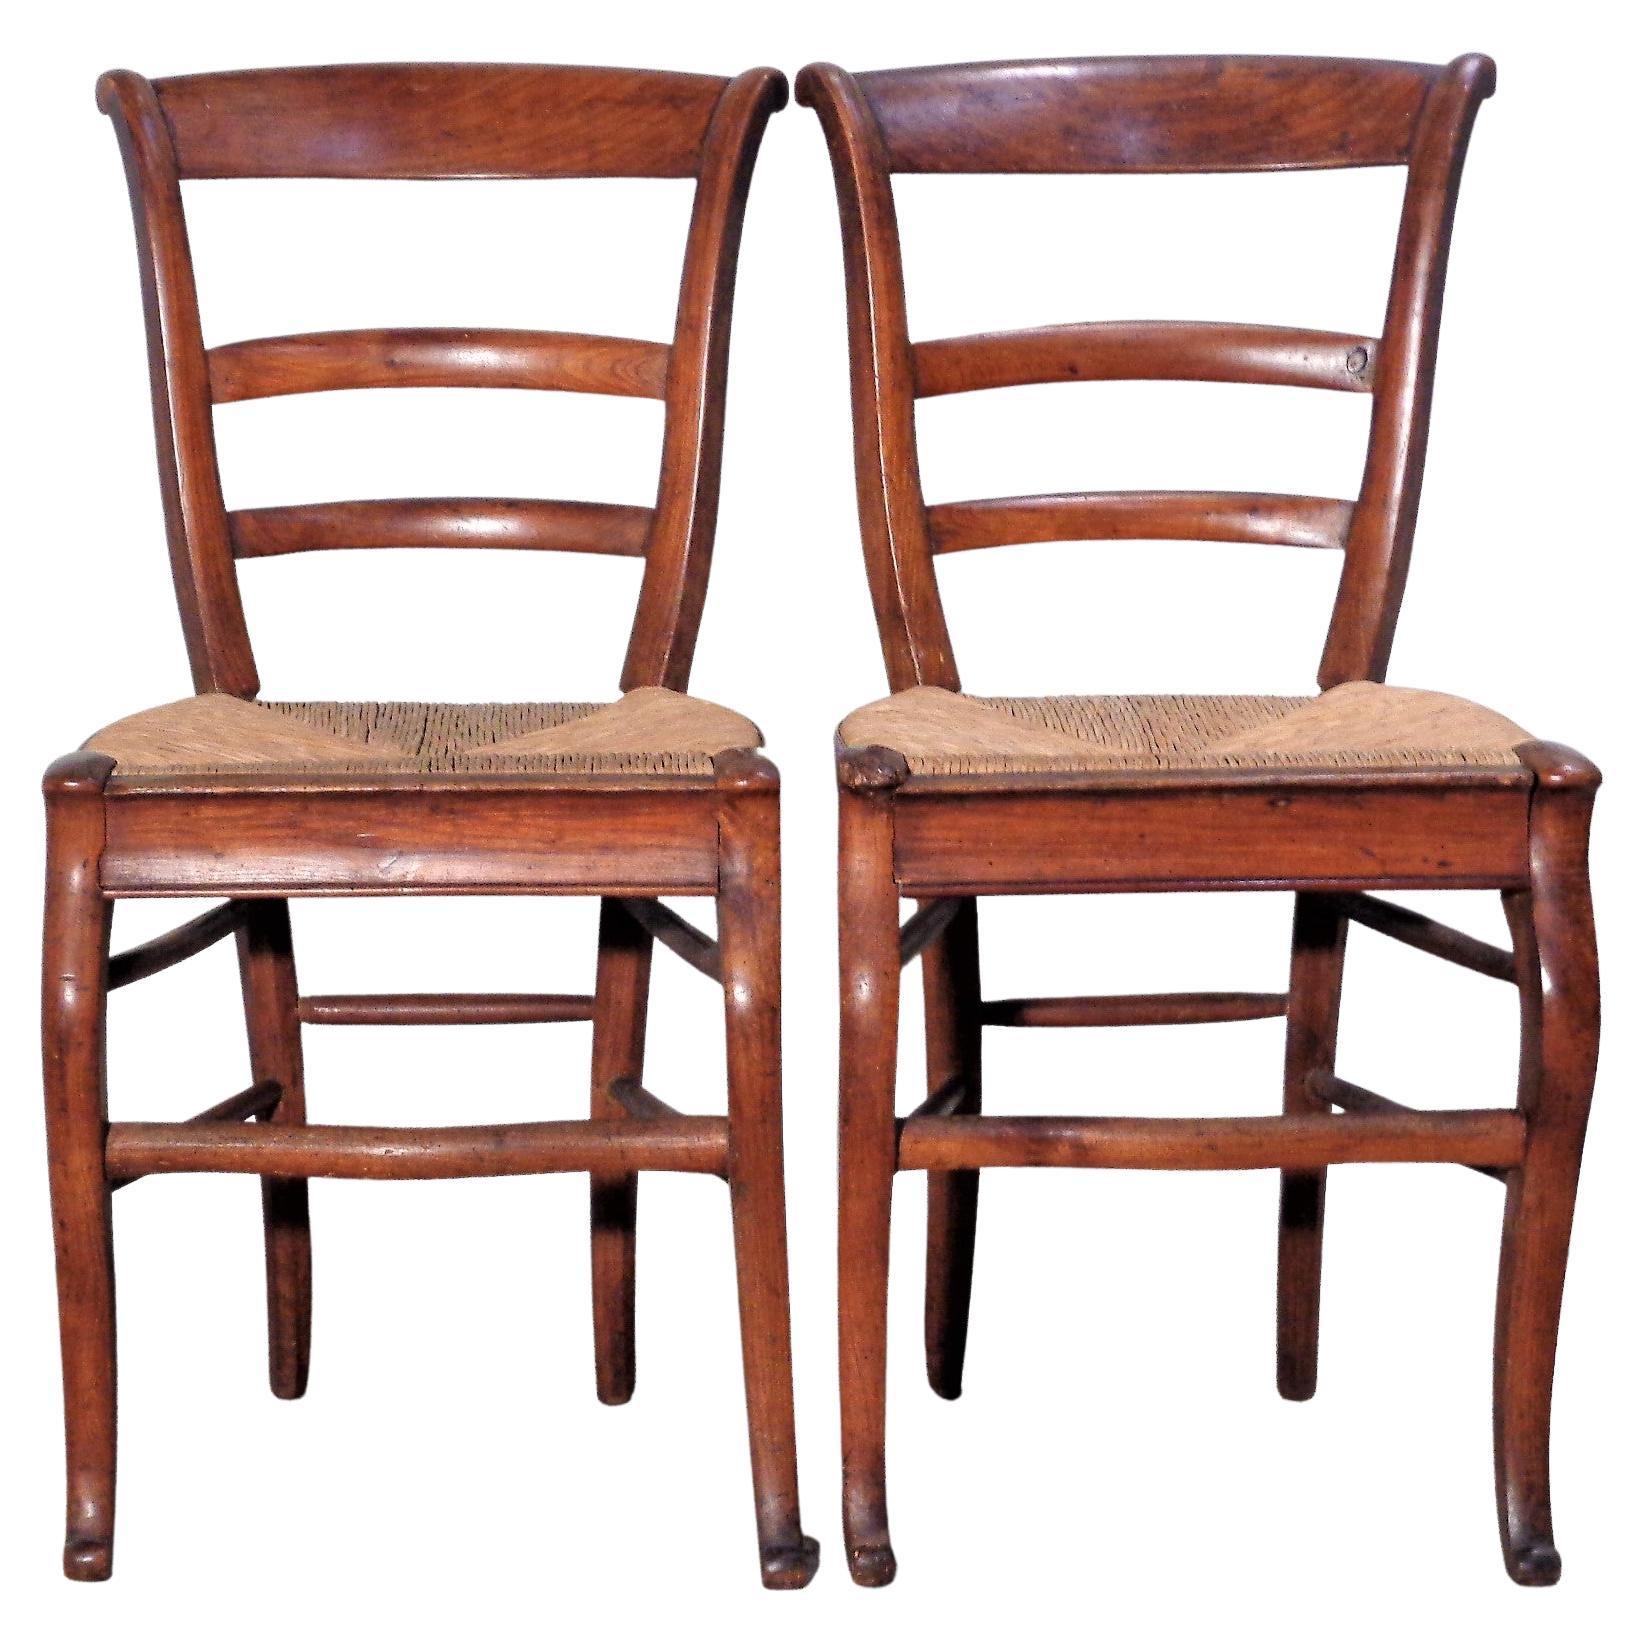 A matched pair of antique country French fruitwood chairs. Finely carved with a very unusual and exceptionally graceful sculptural form. Both chairs in beautifully aged original surface color patina w/ some small burled knots in wood. Date late 18th